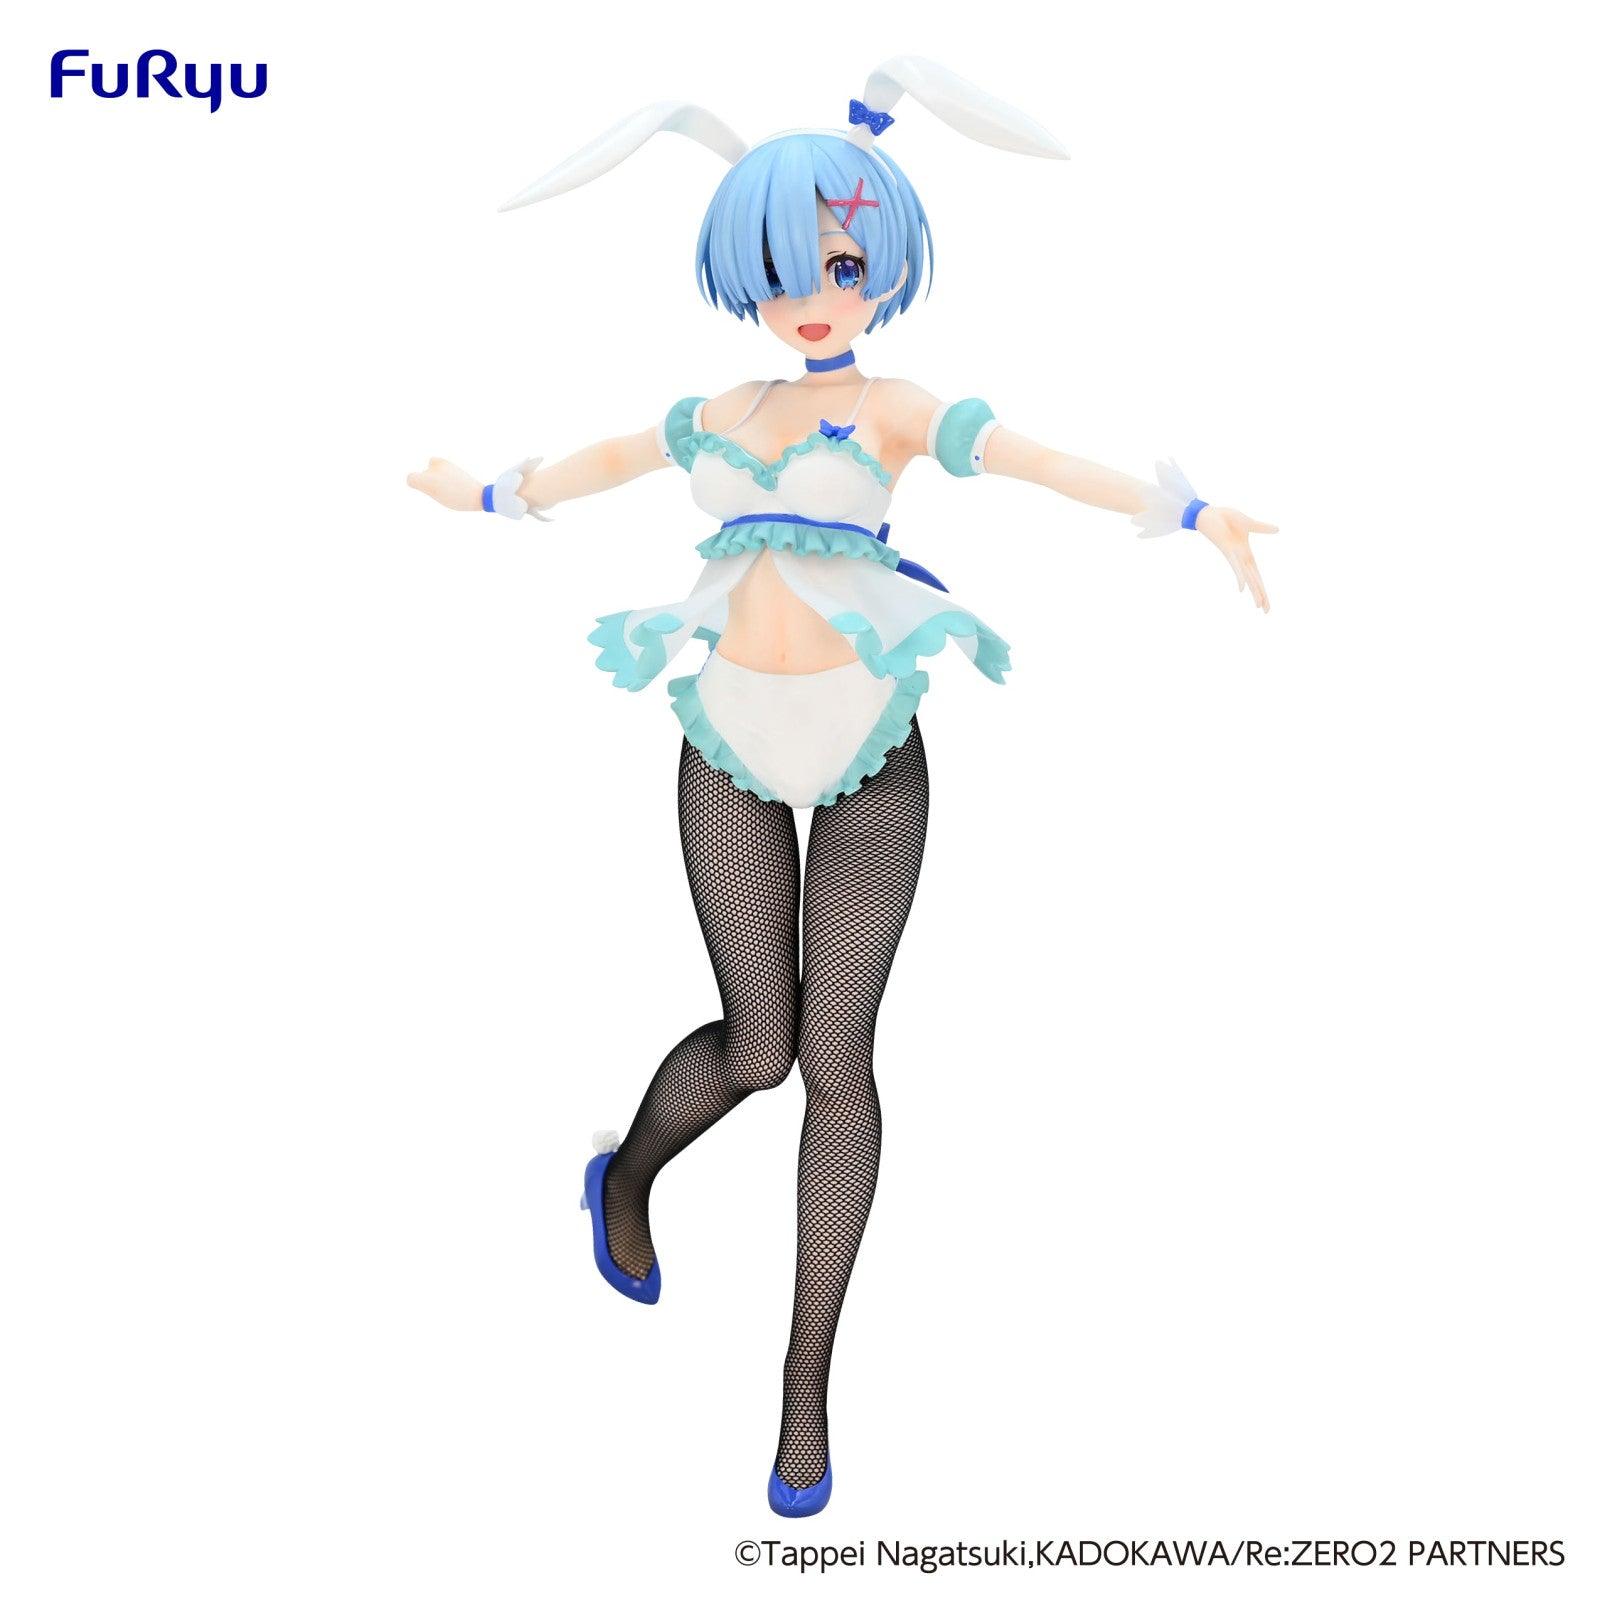 VR-114177 Re:ZERO Starting Life in Another World BiCute Bunnies Figure Rem Cutie Style - Good Smile Company - Titan Pop Culture